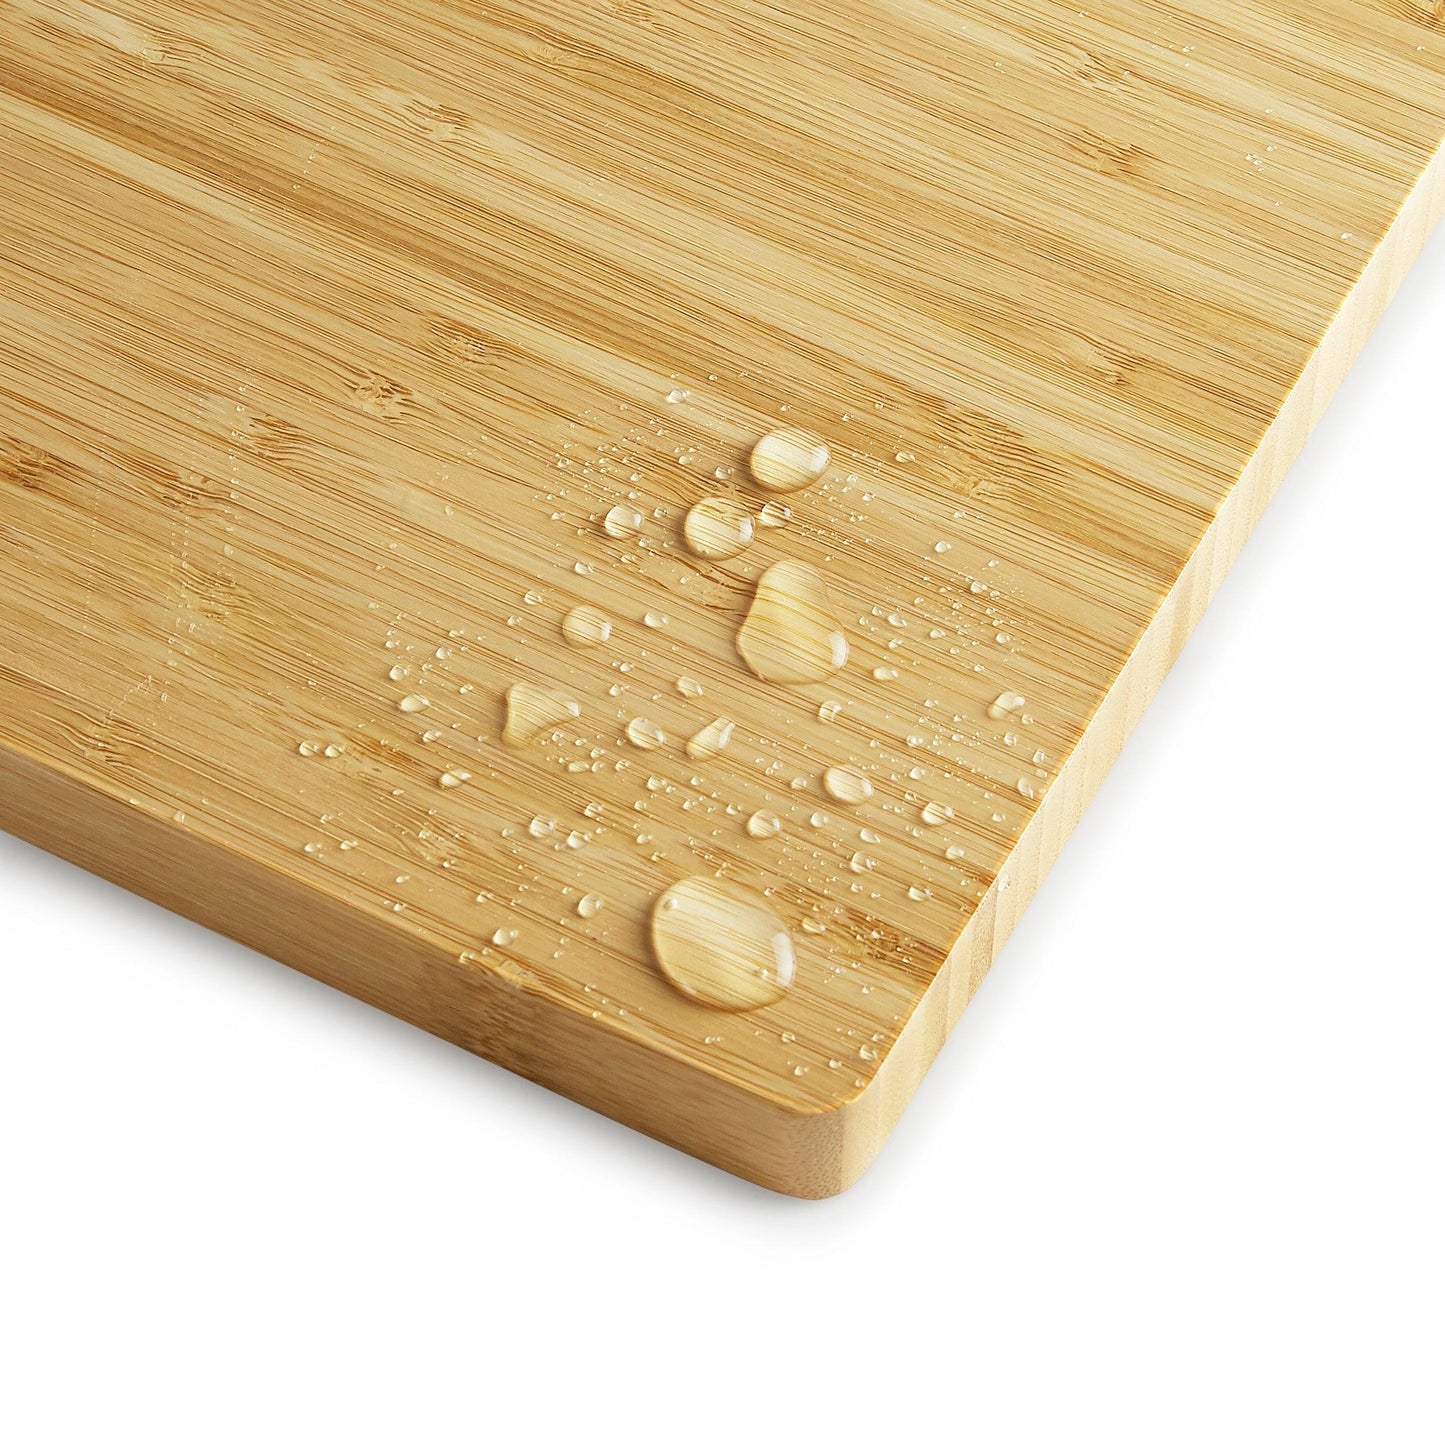 Household Bamboo Cutting board – Lignum Crafts